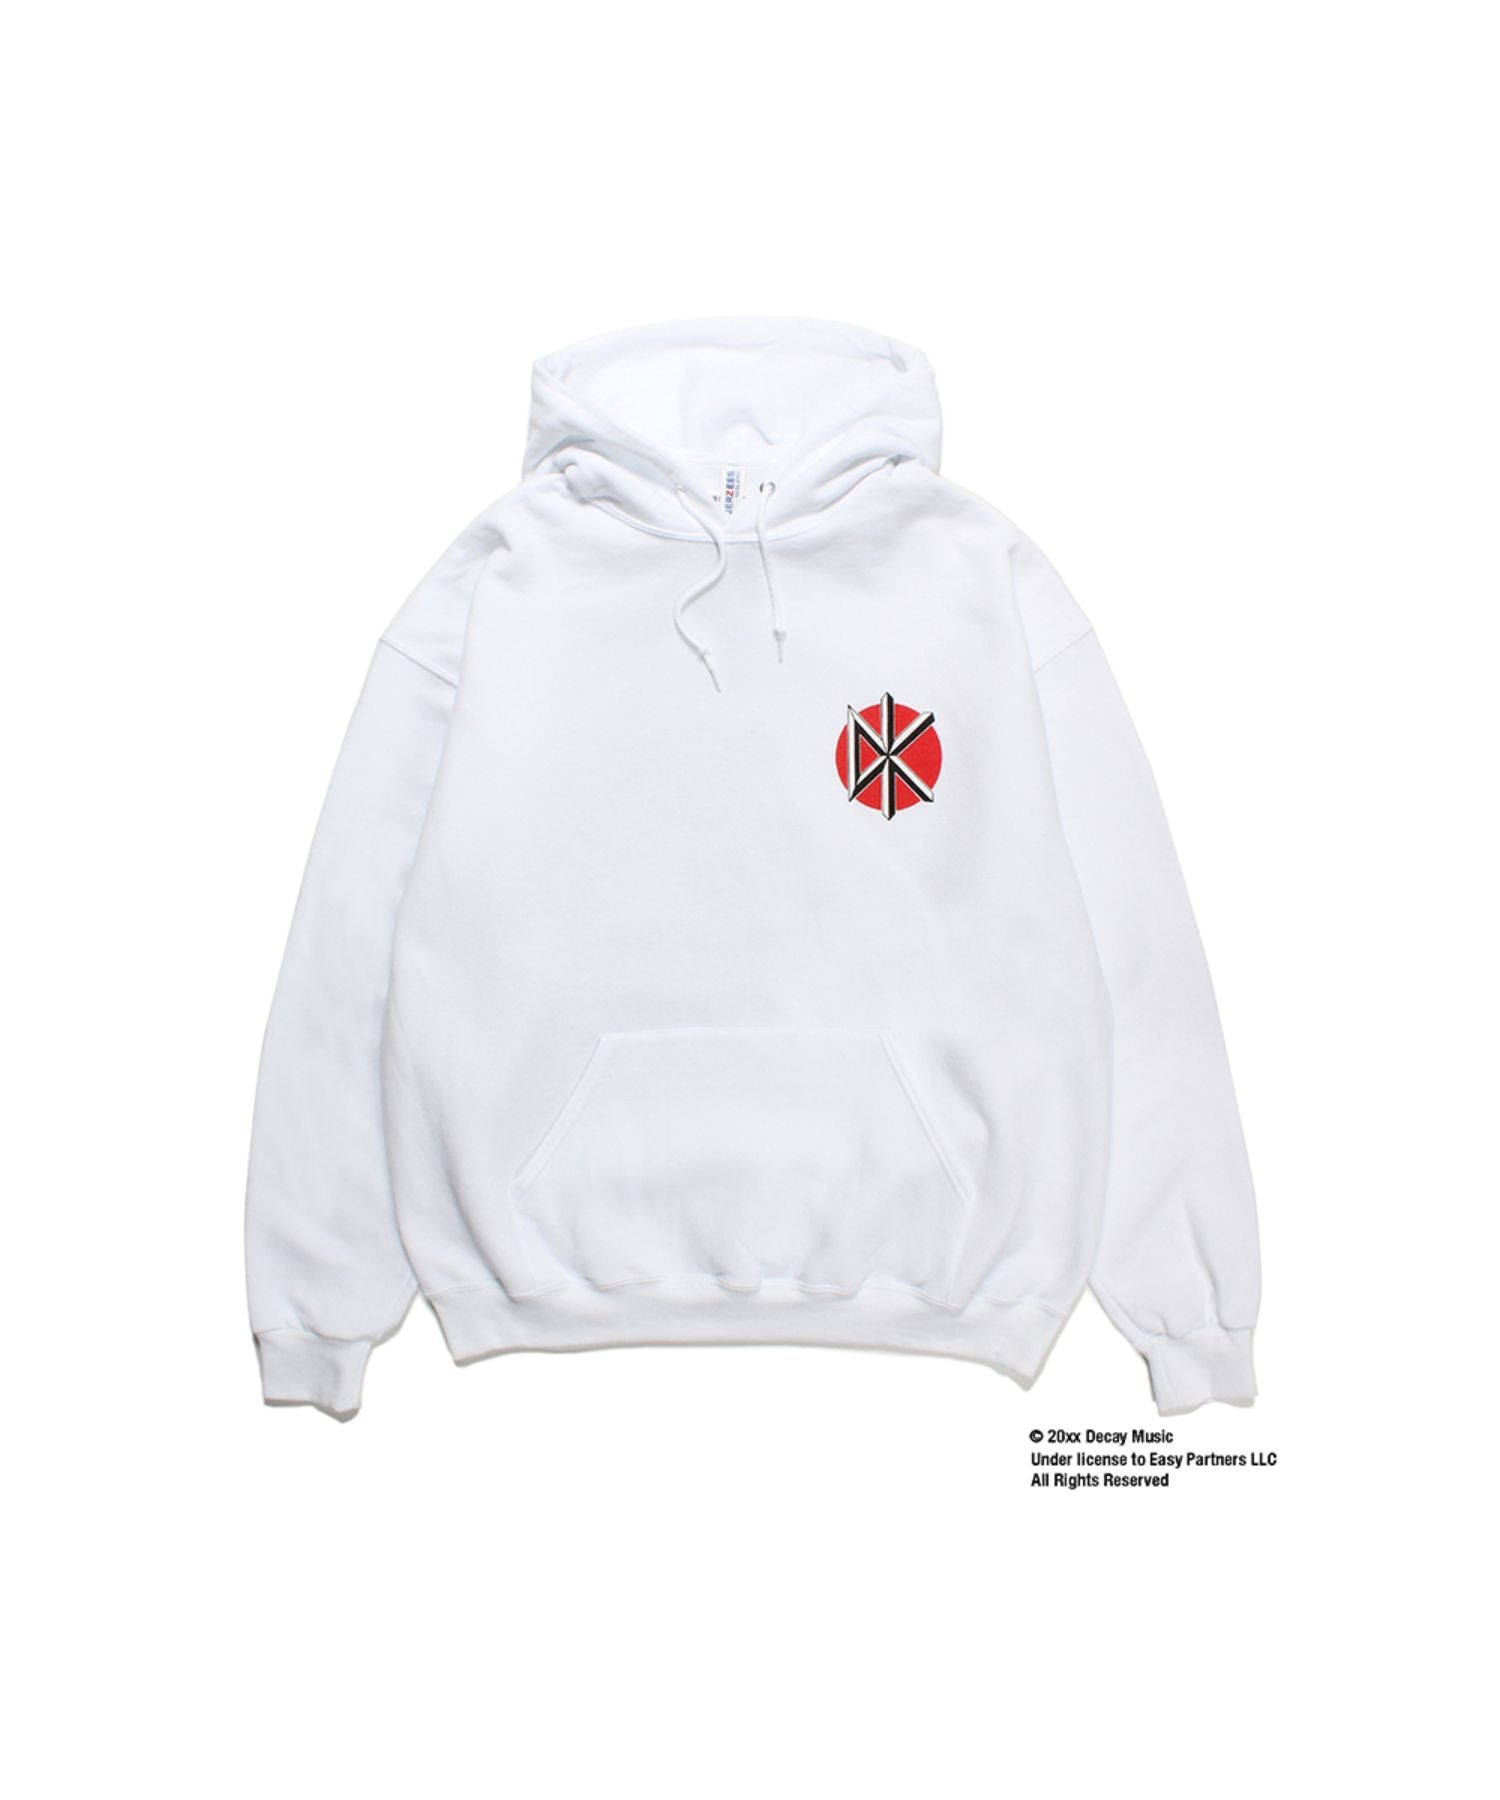 Dead Kennedys / Pullover Hooded Sweat Shirt